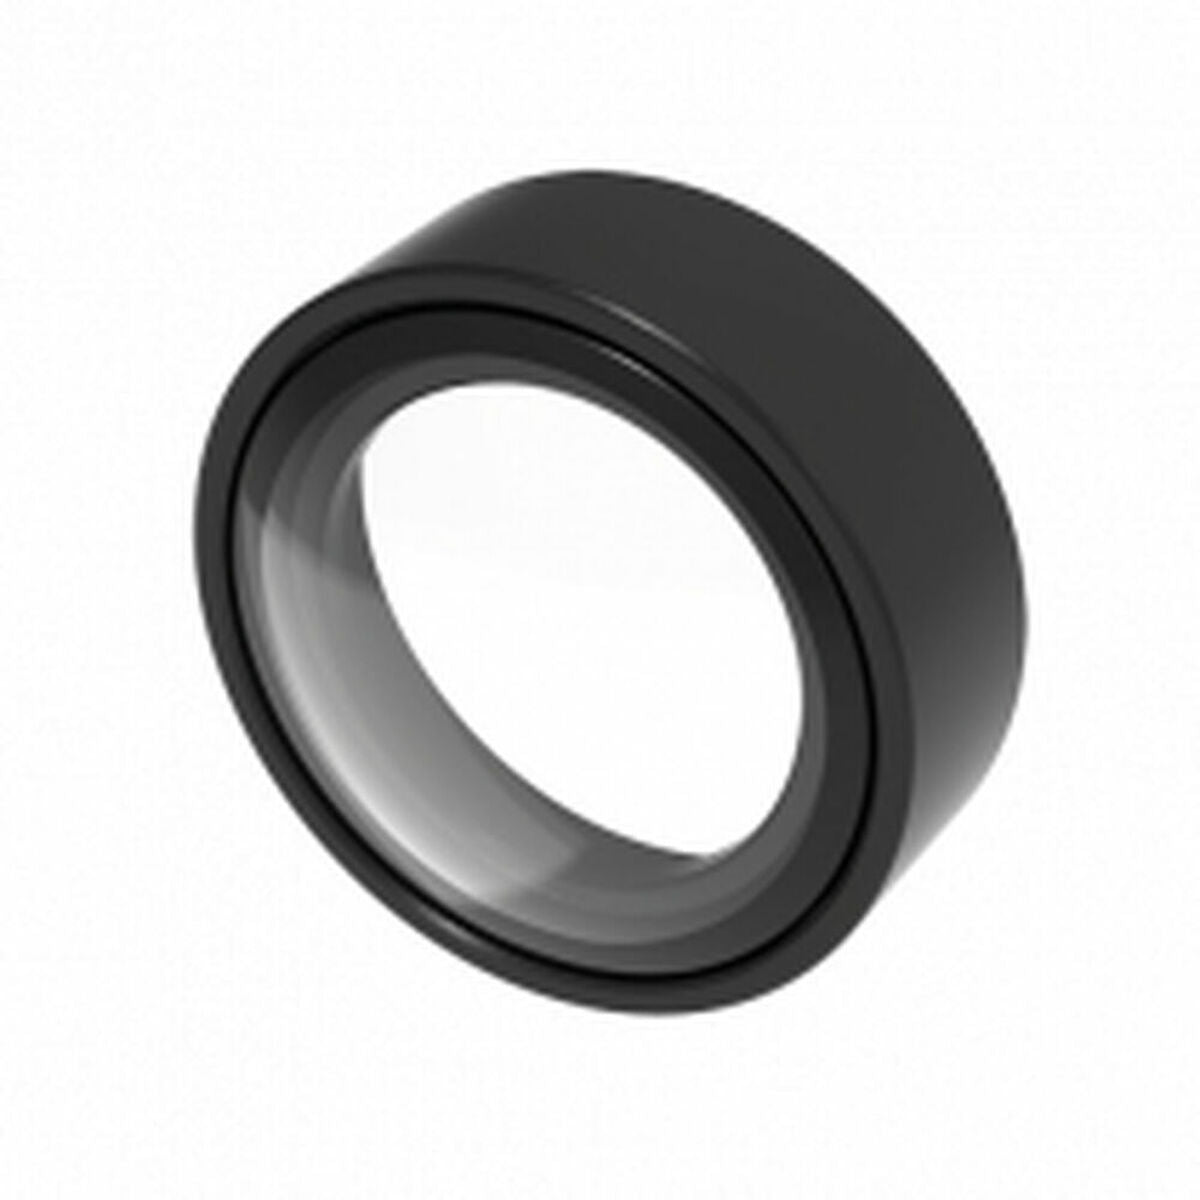 Lens Axis 02032-001, Axis, Electronics, Photography and video cameras, lens-axis-02032-001, :Lenses, Brand_Axis, category-reference-2609, category-reference-2932, category-reference-2936, category-reference-t-19653, category-reference-t-8122, category-reference-t-8337, category-reference-t-8338, category-reference-t-8340, Condition_NEW, entertainment, fotografía, Price_100 - 200, travel, RiotNook